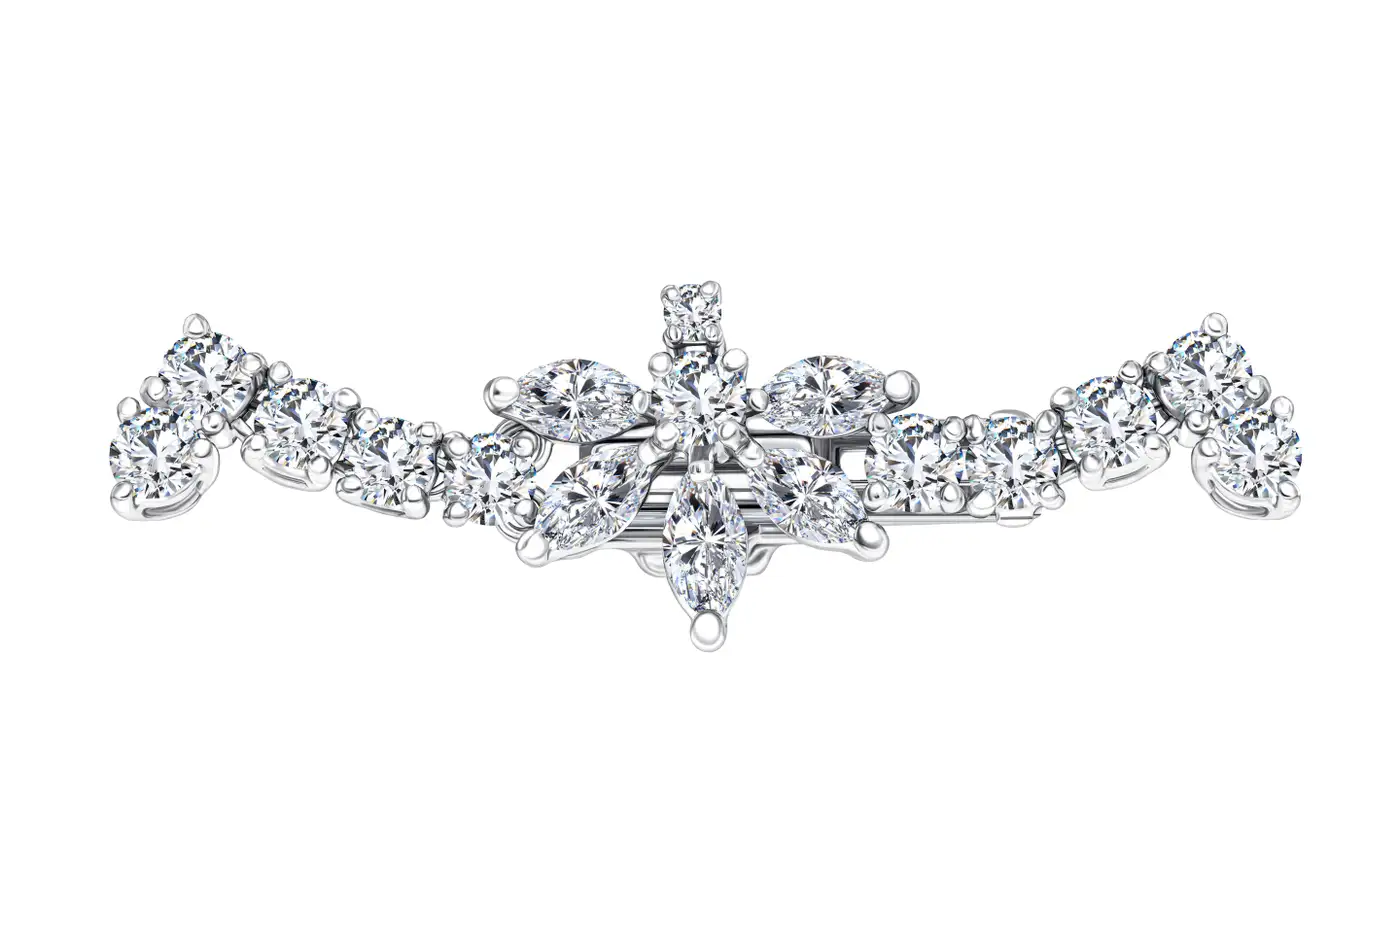 Fancy-Pear-Marquise-Shaped-Diamond-Tiara-Necklace-GIA-Certified-32.03-Carat-9.webp